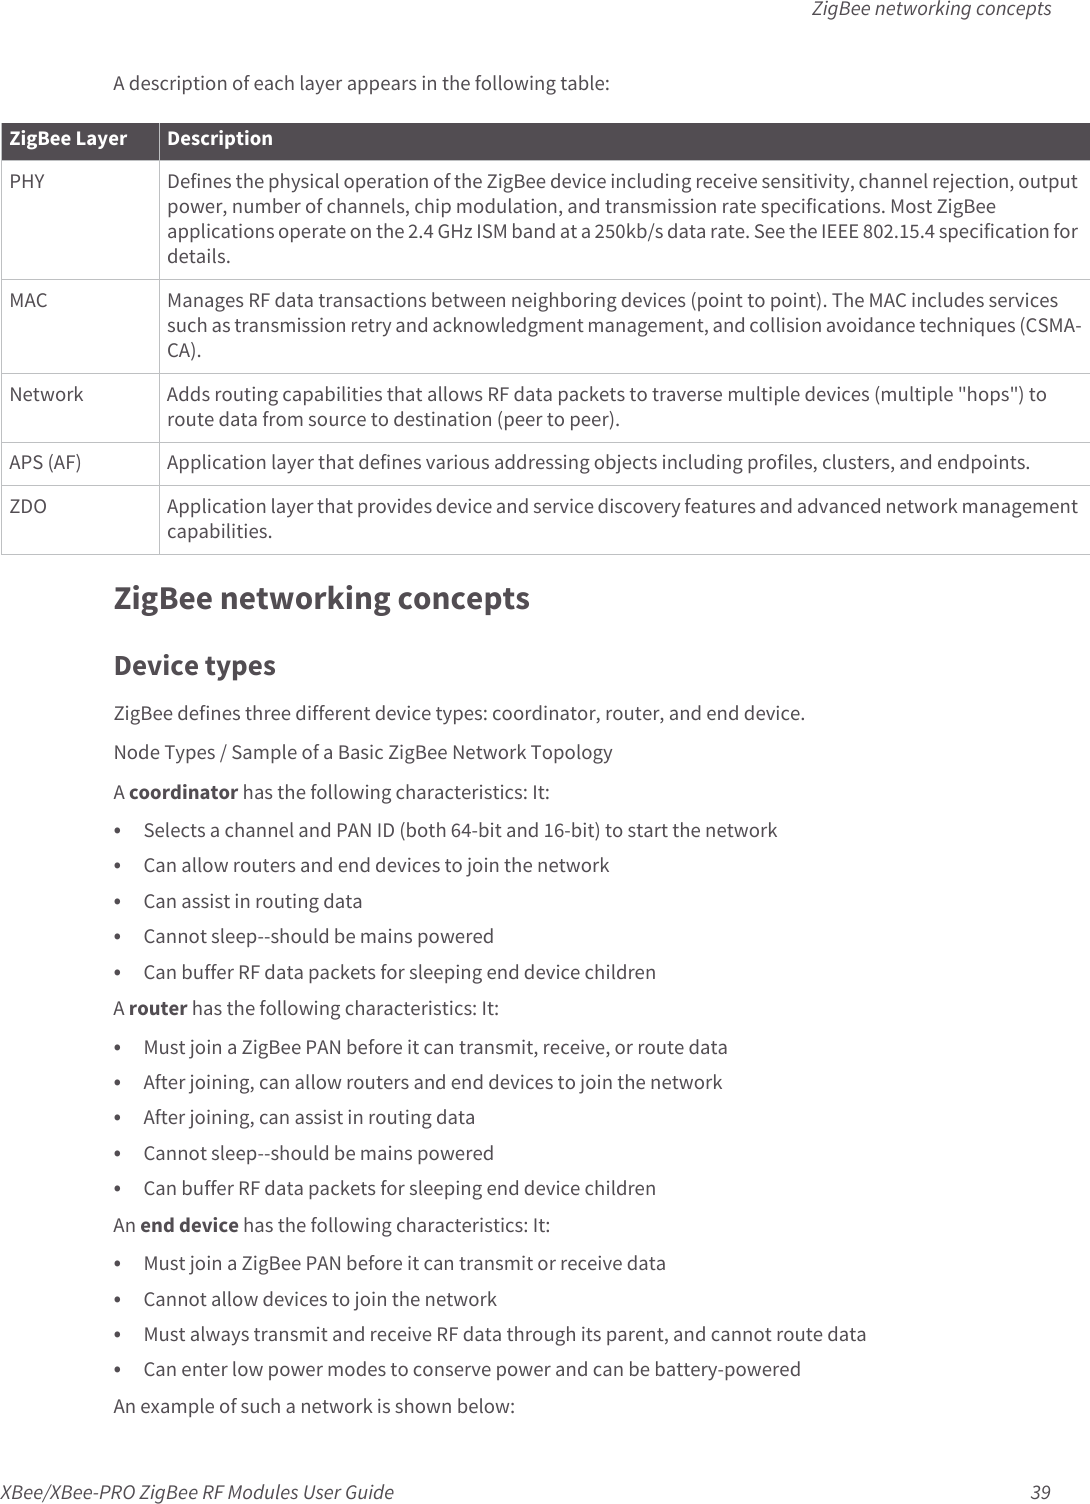 ZigBee networking conceptsXBee/XBee-PRO ZigBee RF Modules User Guide 39A description of each layer appears in the following table:ZigBee networking conceptsDevice typesZigBee defines three different device types: coordinator, router, and end device. Node Types / Sample of a Basic ZigBee Network Topology A coordinator has the following characteristics: It:•Selects a channel and PAN ID (both 64-bit and 16-bit) to start the network•Can allow routers and end devices to join the network•Can assist in routing data•Cannot sleep--should be mains powered•Can buffer RF data packets for sleeping end device childrenA router has the following characteristics: It: •Must join a ZigBee PAN before it can transmit, receive, or route data•After joining, can allow routers and end devices to join the network•After joining, can assist in routing data•Cannot sleep--should be mains powered•Can buffer RF data packets for sleeping end device childrenAn end device has the following characteristics: It:•Must join a ZigBee PAN before it can transmit or receive data•Cannot allow devices to join the network•Must always transmit and receive RF data through its parent, and cannot route data•Can enter low power modes to conserve power and can be battery-powered An example of such a network is shown below:ZigBee Layer Description PHY Defines the physical operation of the ZigBee device including receive sensitivity, channel rejection, output power, number of channels, chip modulation, and transmission rate specifications. Most ZigBee applications operate on the 2.4 GHz ISM band at a 250kb/s data rate. See the IEEE 802.15.4 specification for details.MAC Manages RF data transactions between neighboring devices (point to point). The MAC includes services such as transmission retry and acknowledgment management, and collision avoidance techniques (CSMA-CA).Network Adds routing capabilities that allows RF data packets to traverse multiple devices (multiple &quot;hops&quot;) to route data from source to destination (peer to peer).APS (AF) Application layer that defines various addressing objects including profiles, clusters, and endpoints. ZDO Application layer that provides device and service discovery features and advanced network management capabilities.